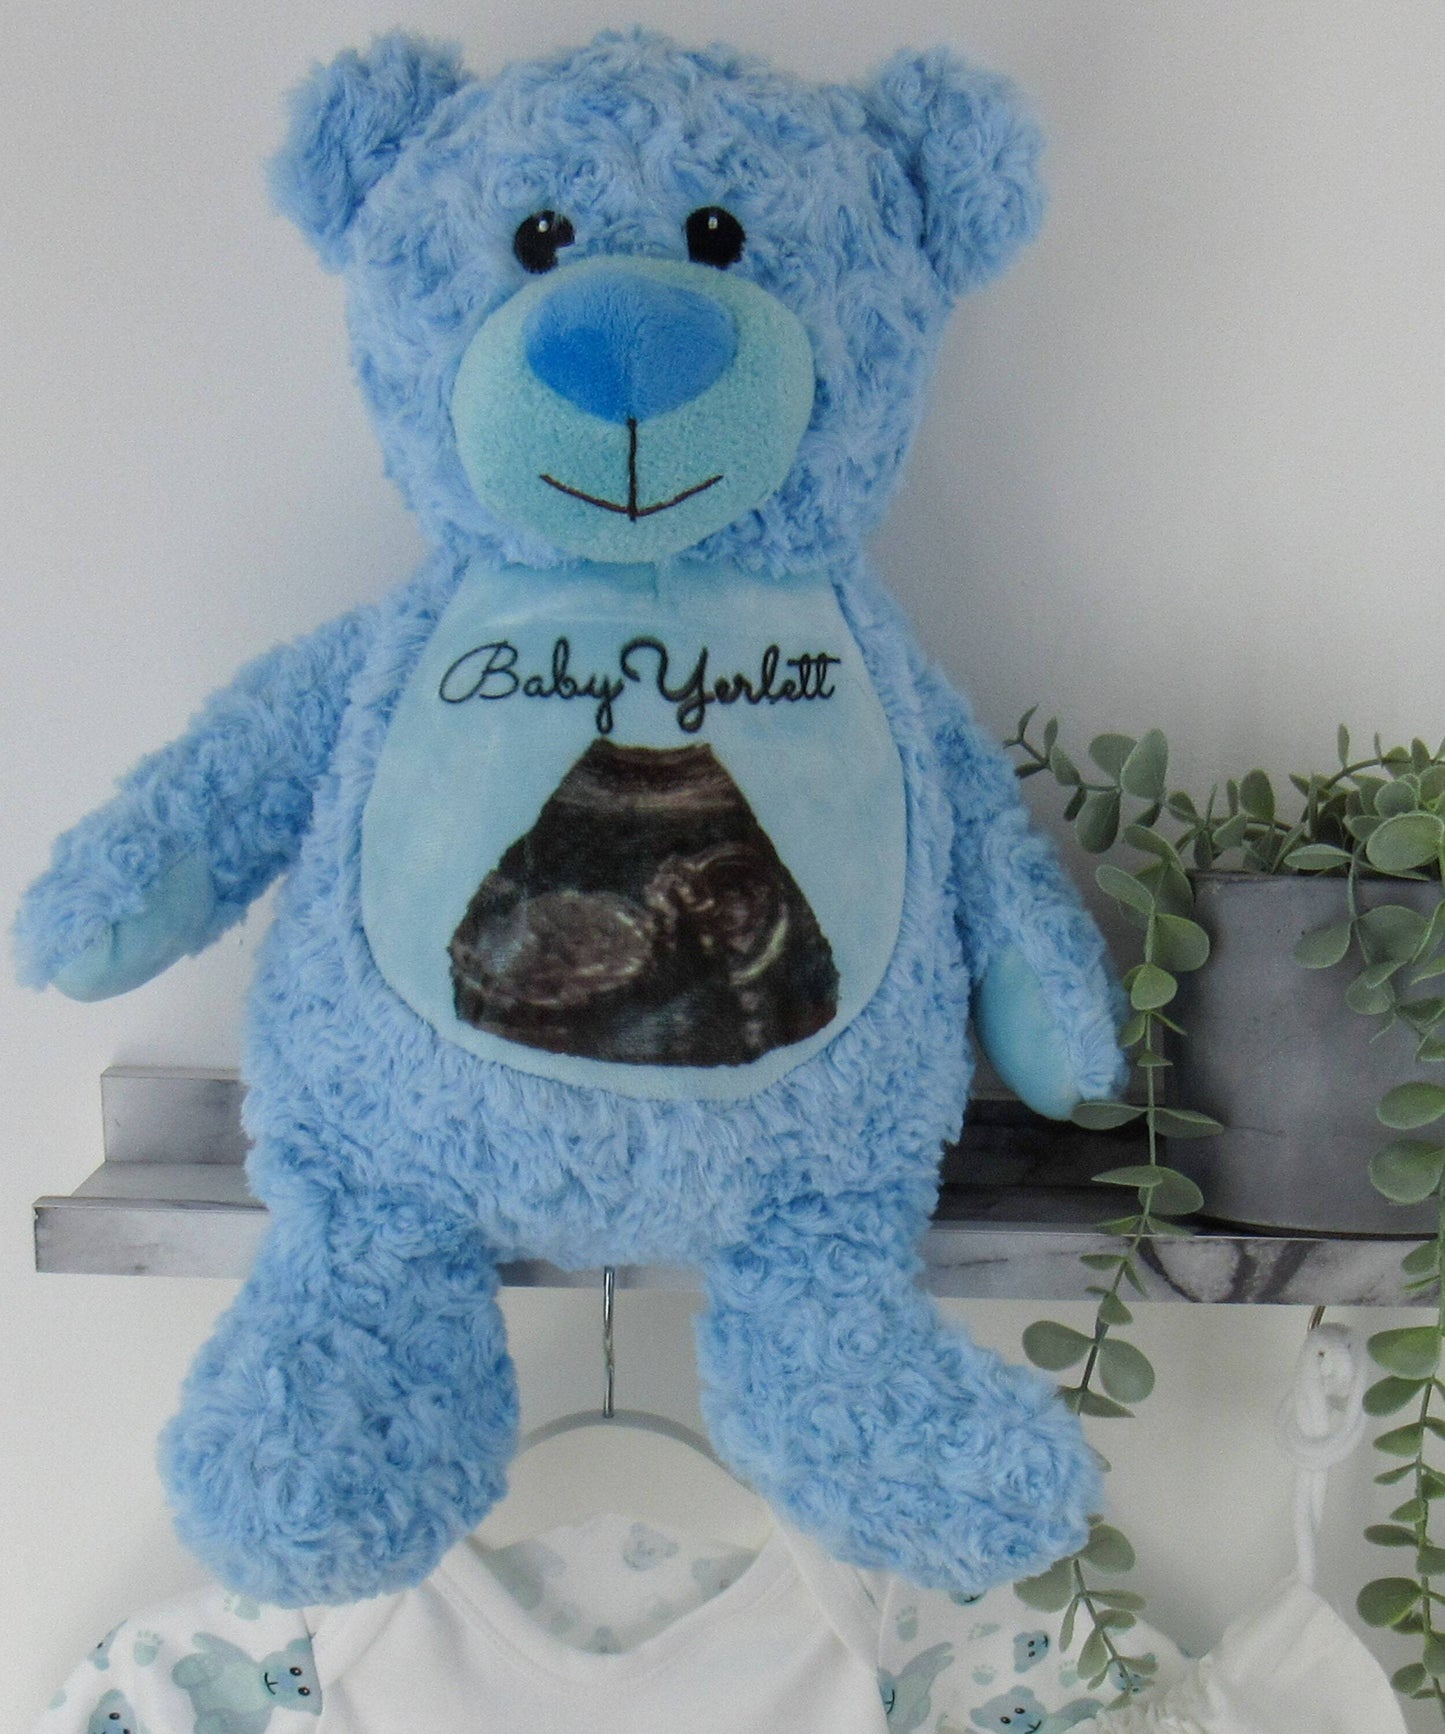 Blue teddy bear printed in black text with Baby name and a baby ultrasound scan image. By Sweetlea Gifts